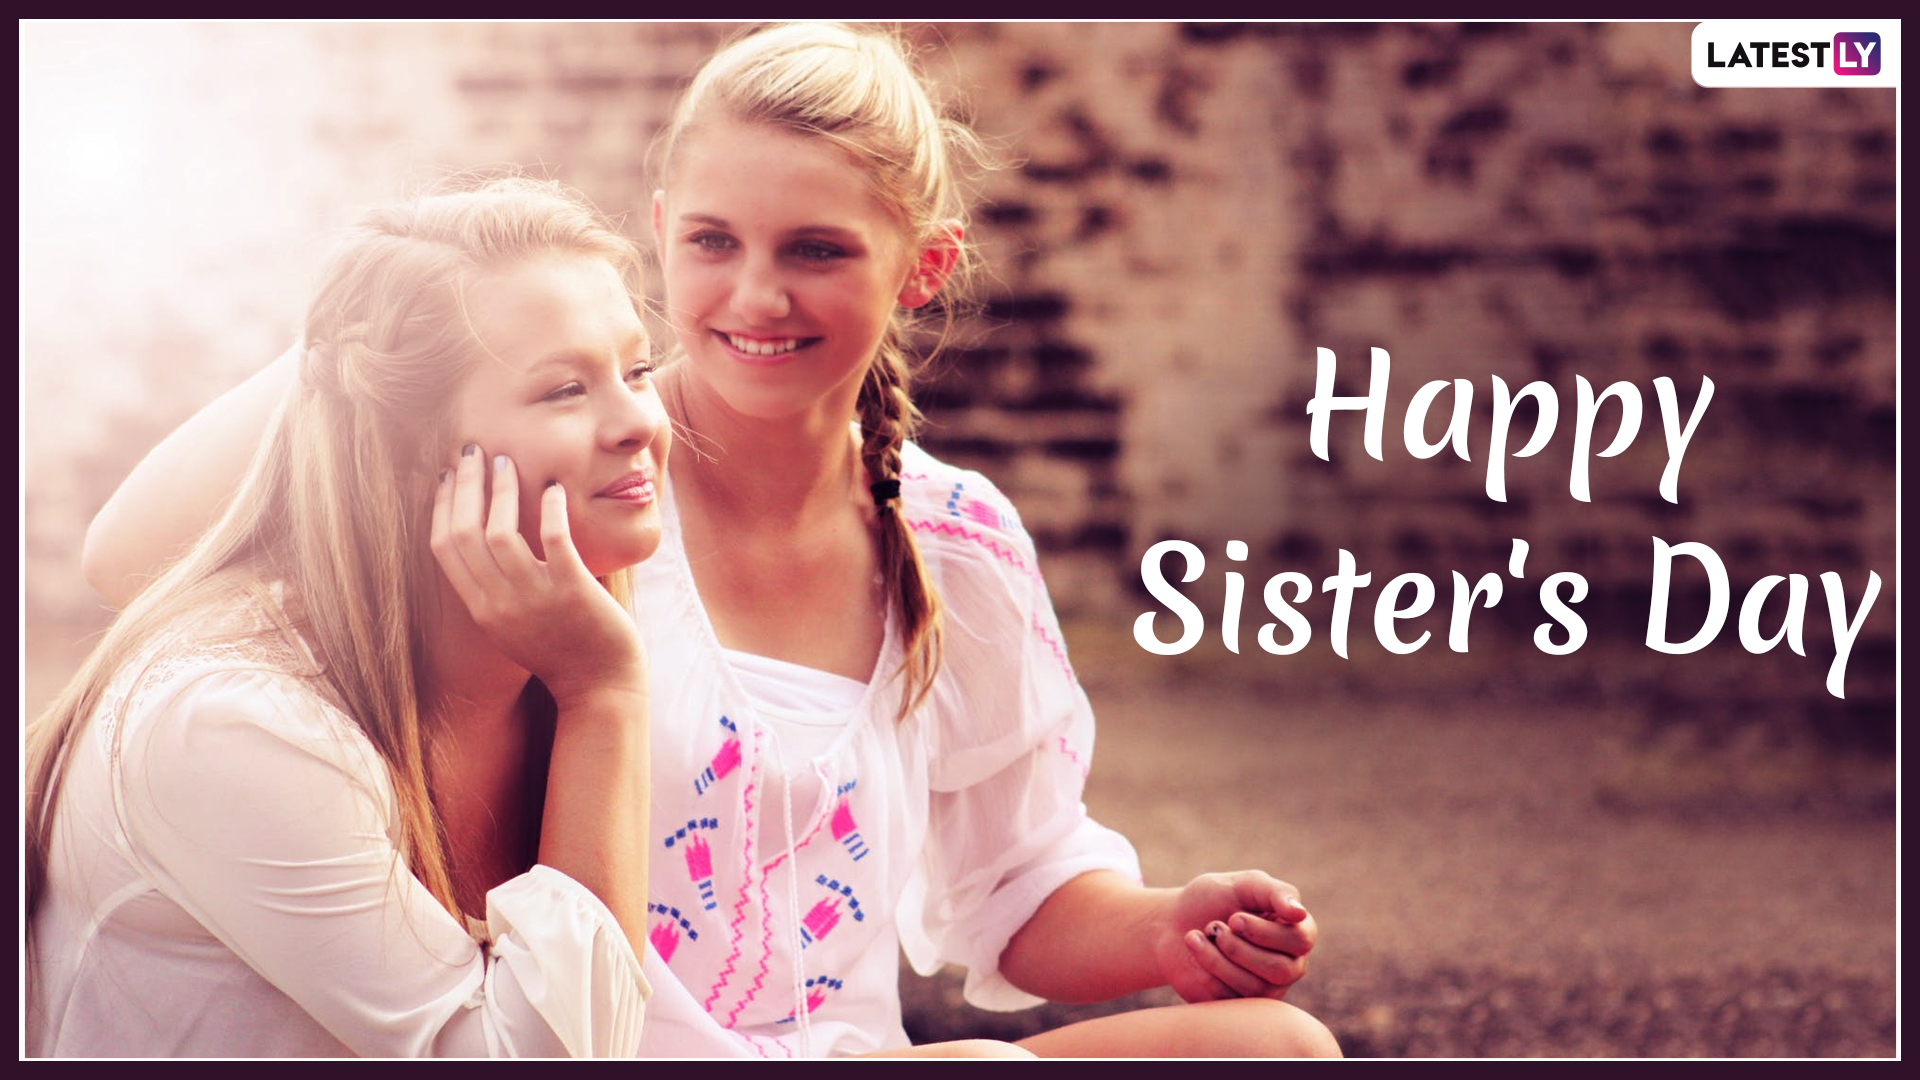 Festivals & Events News Happy Sisters' Day 2020 Wishes, Greetings